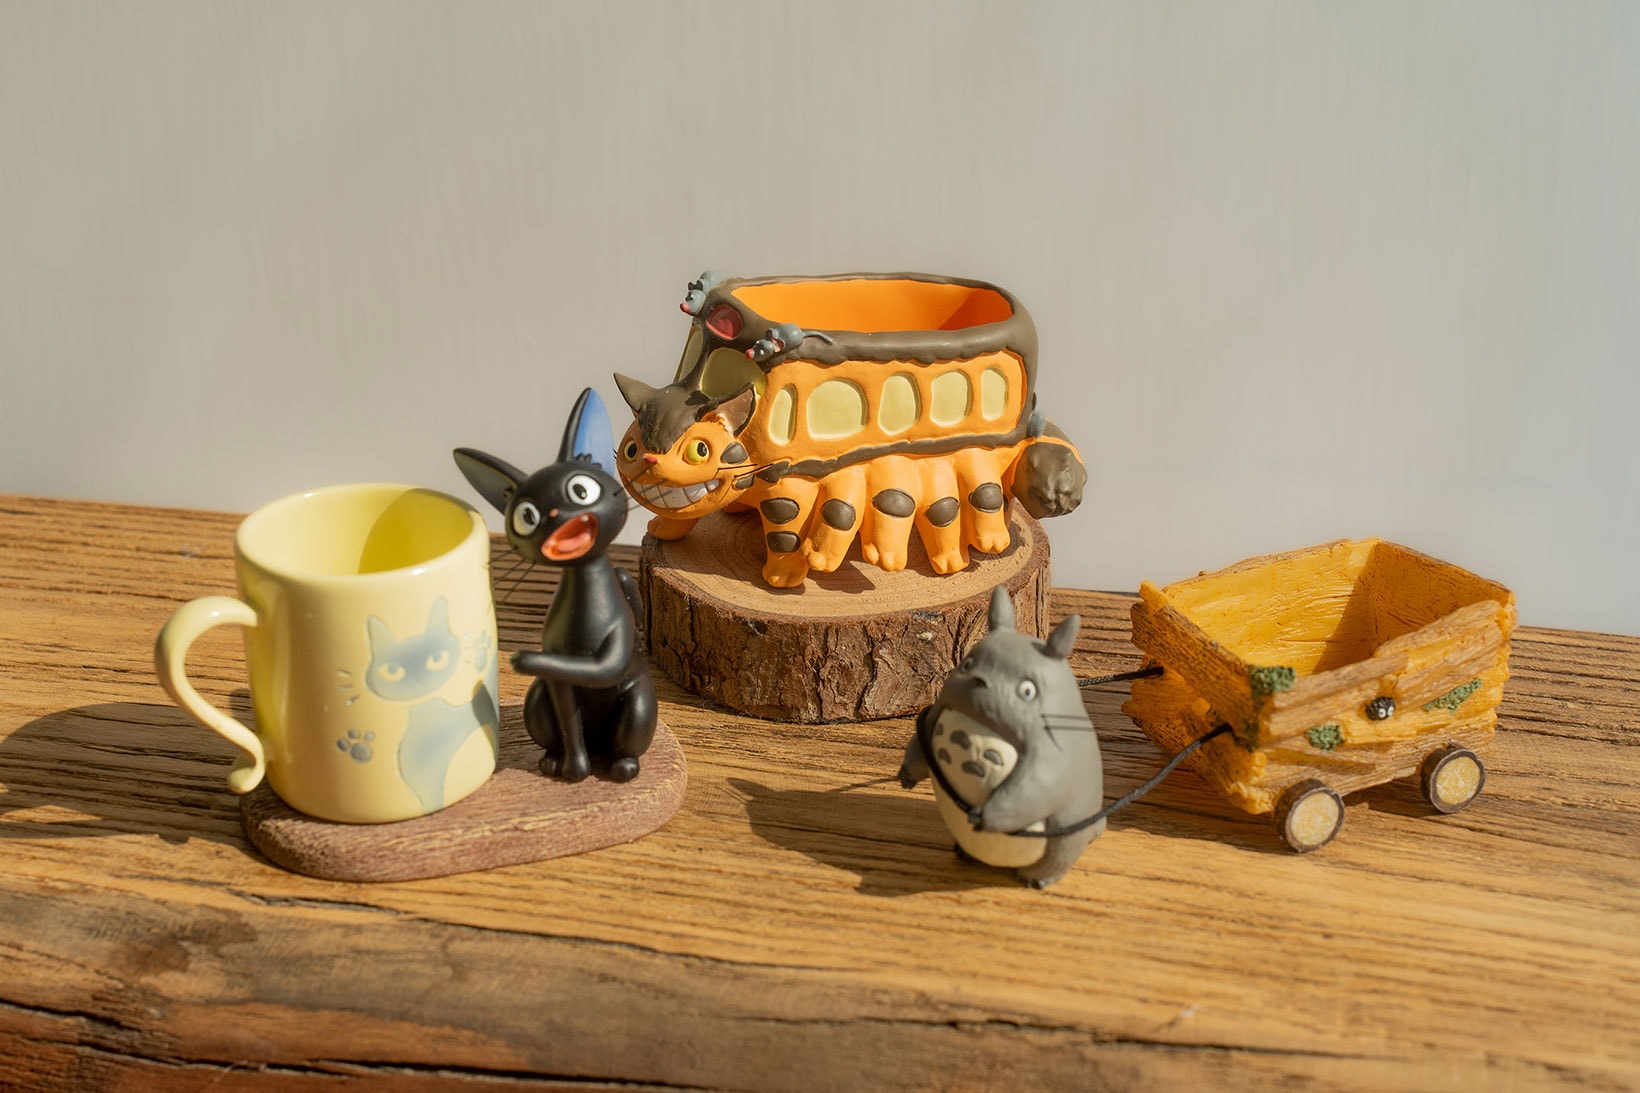 Studio Ghibli Ceramic Plant Pots Kitchenware Lunar New Year Collection Where to Buy